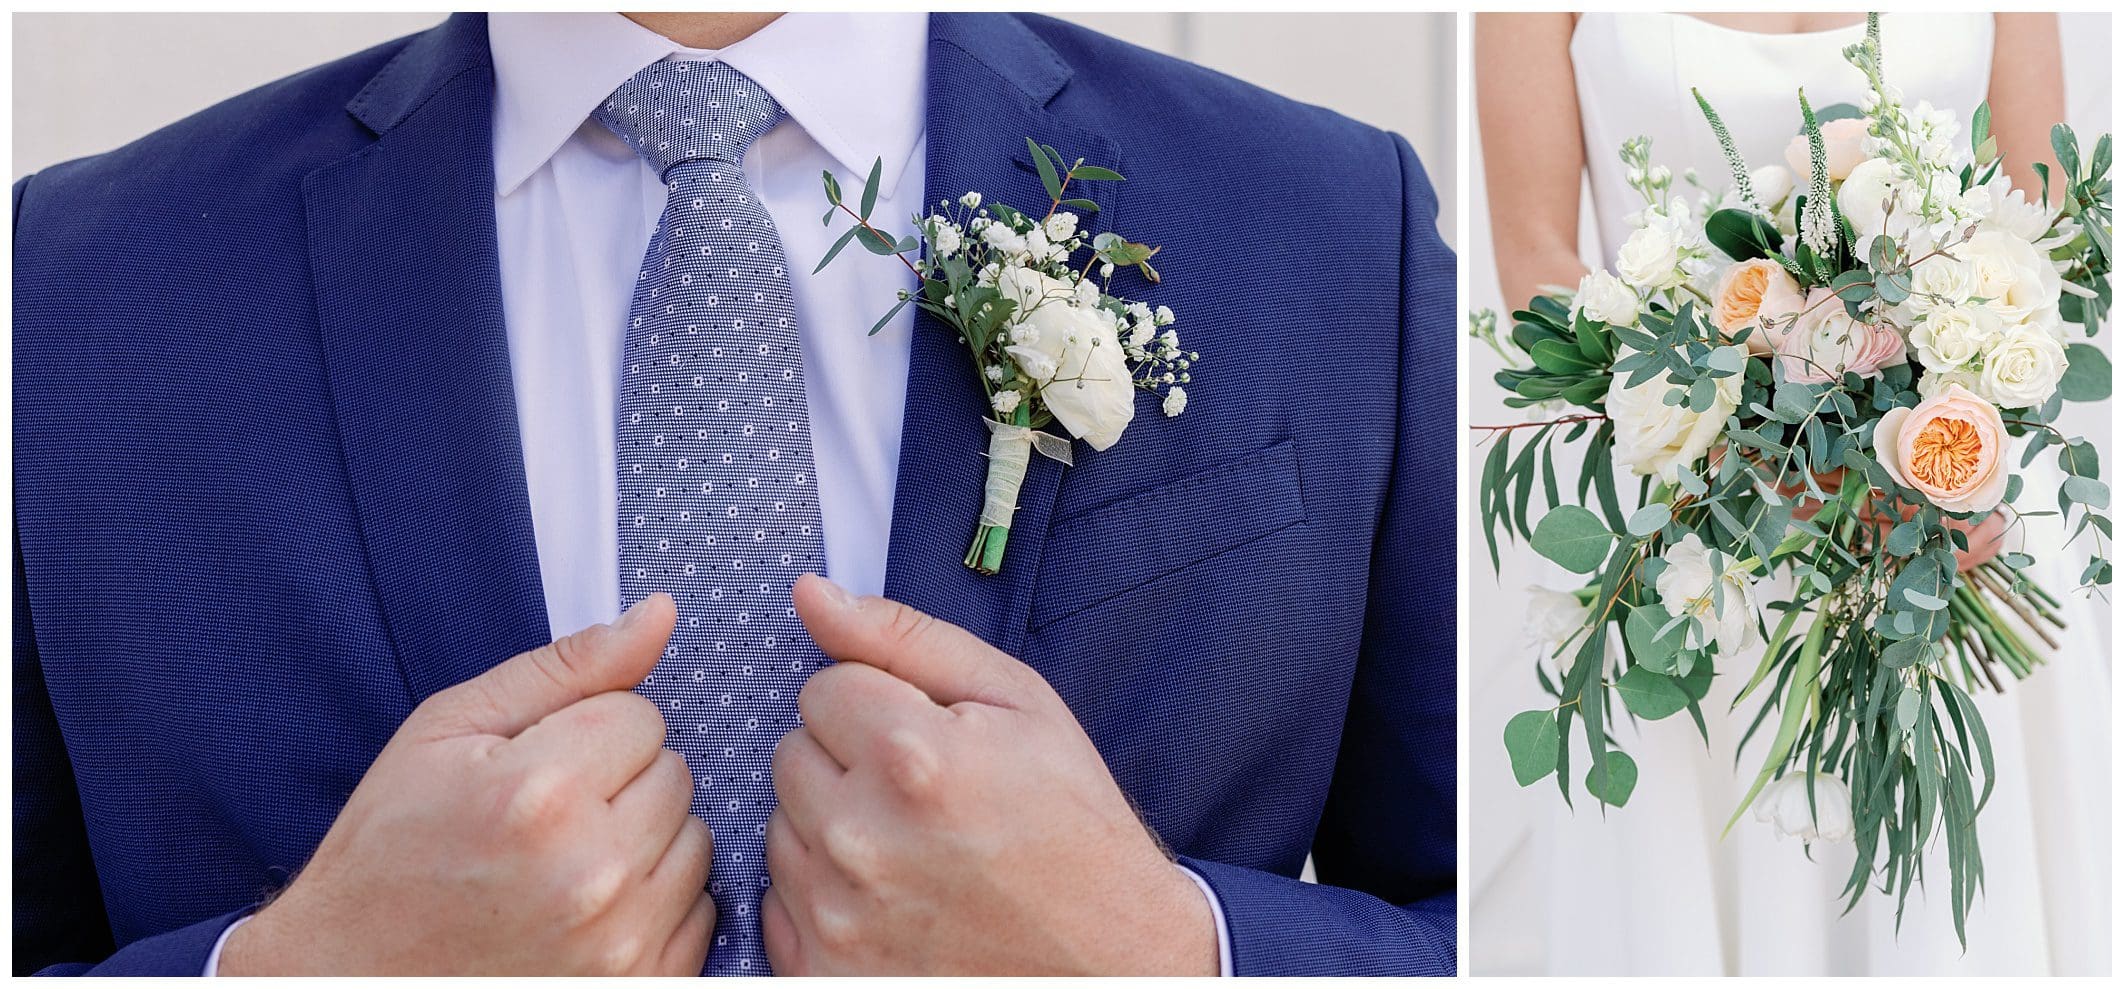 A man in a blue suit is putting on a boutonniere.